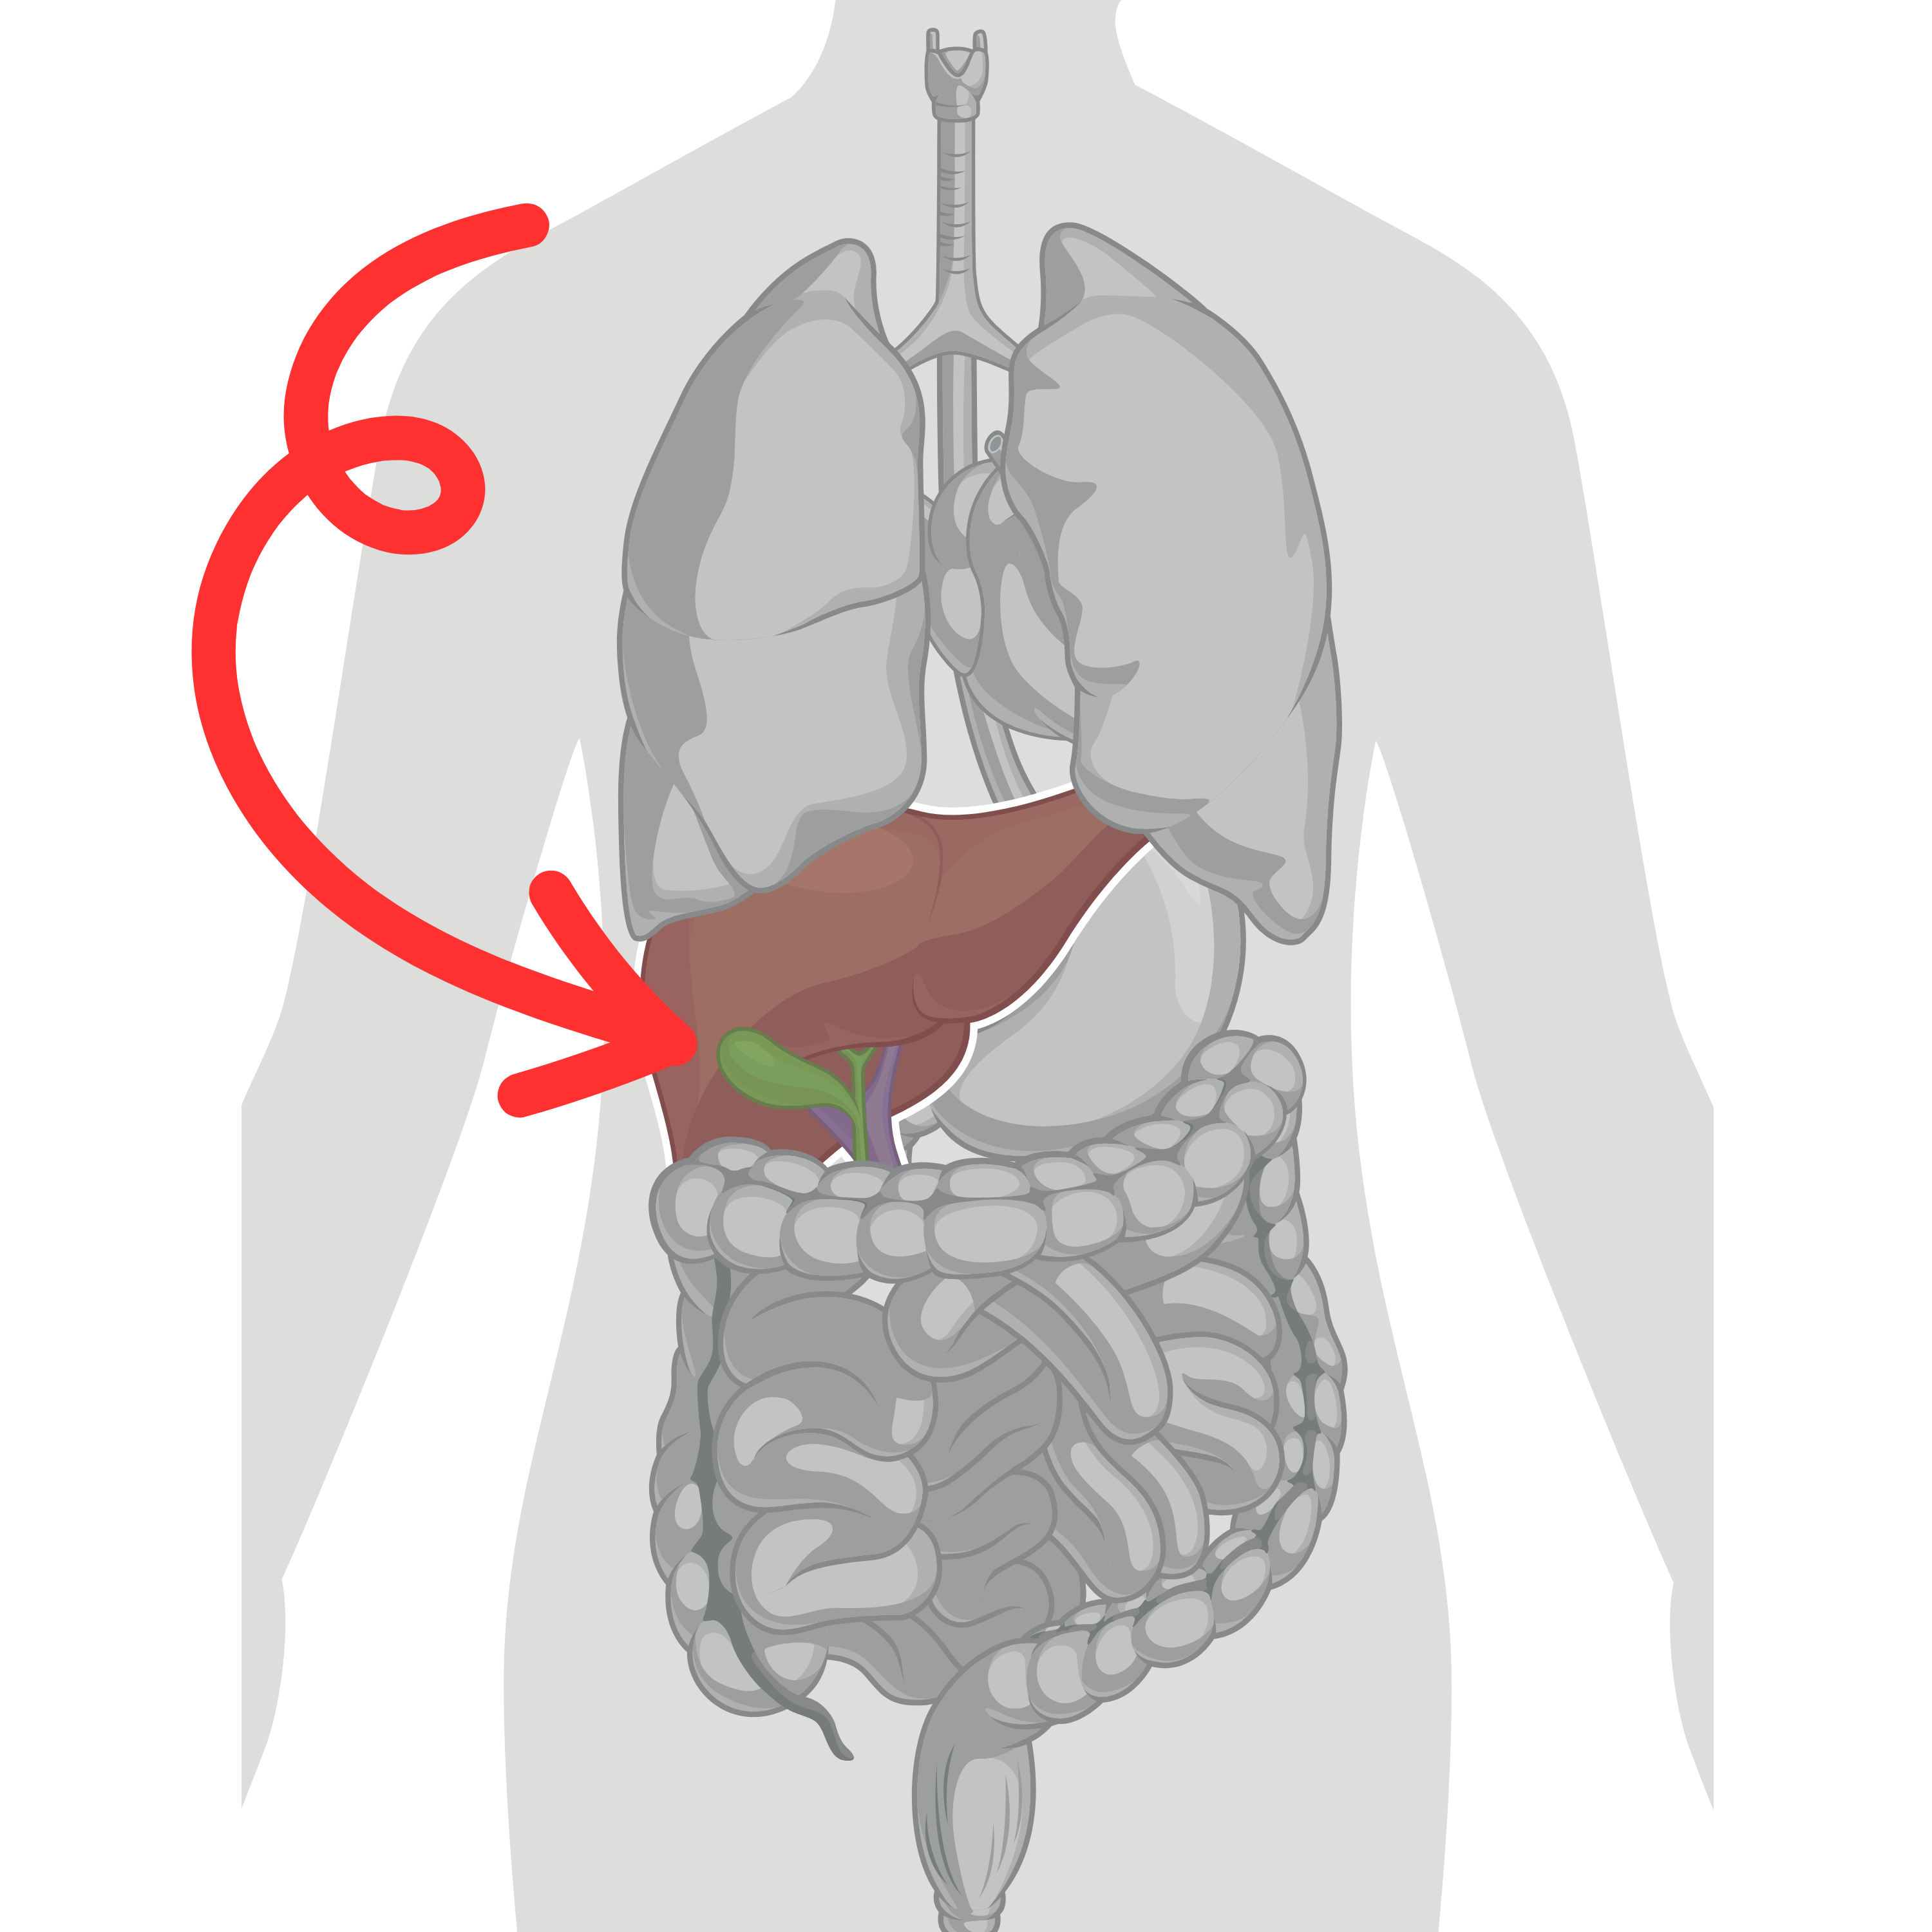 The Gallbladder: A Vital Organ for Healthy Digestion and Detoxification